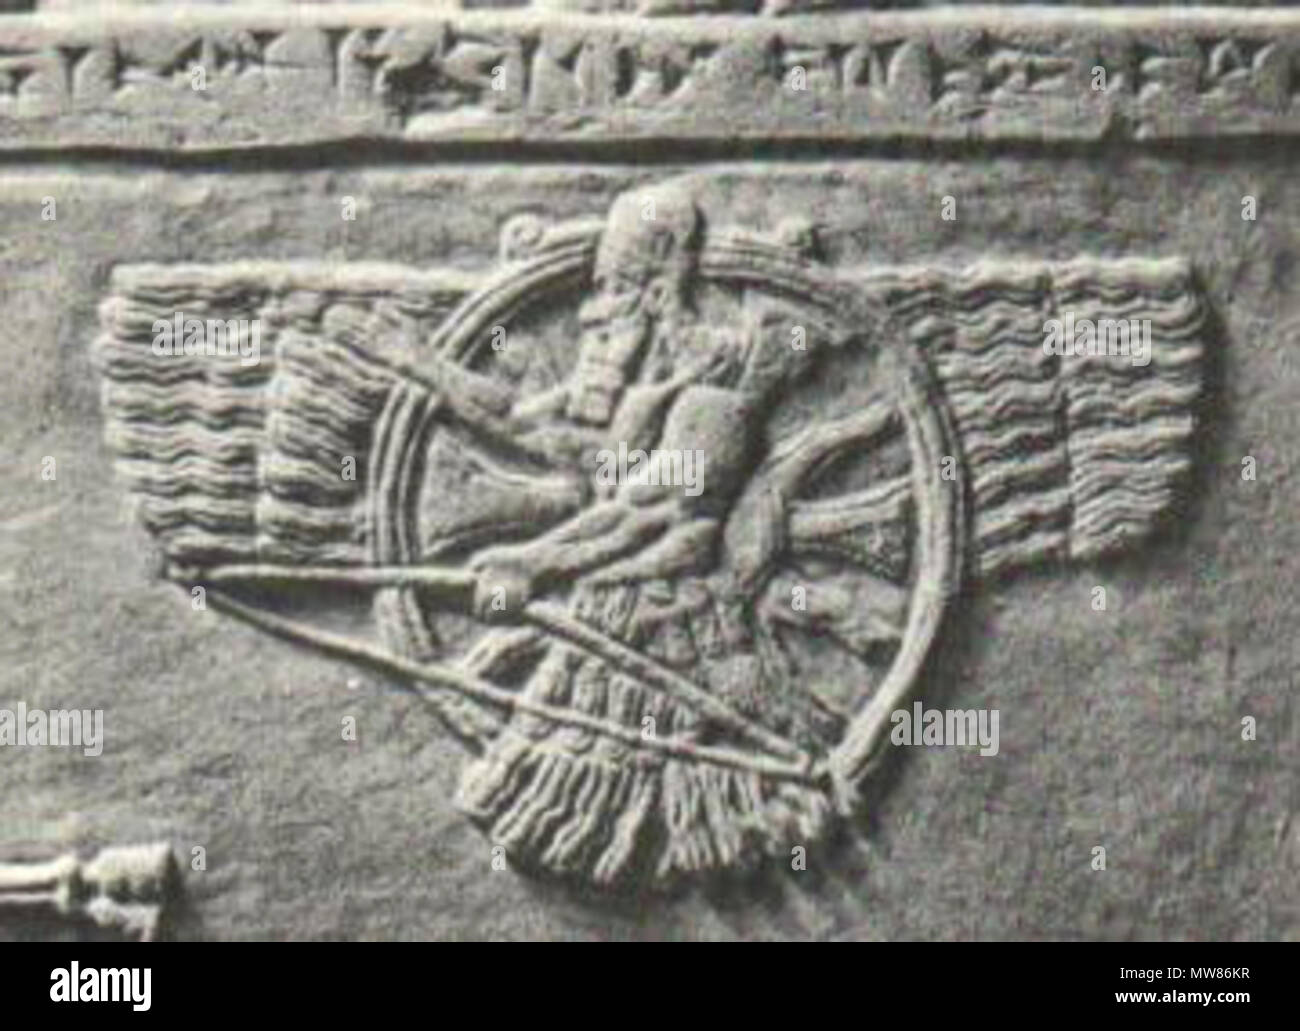 . English: Assyrian 'feather-robed archer' figure, superimposed over a winged sun symbol. [1][2] Myths of Babylonia and Assyria by Donald A. Mackenzie (1915): Ashur was not a 'goat of heaven', but a 'bull of heaven', like the Sumerian Nannar (Sin), the moon god of Ur, Ninip of Saturn, and Bel Enlil. As the bull, however, he was, like Anshar, the ruling animal of the heavens; and like Anshar he had associated with him 'six divinities of council'. Other deities who were similarly exalted as 'high heads' at various centres and at various periods, included Anu, Bel Enlil, and Ea, Merodach, Nergal, Stock Photo